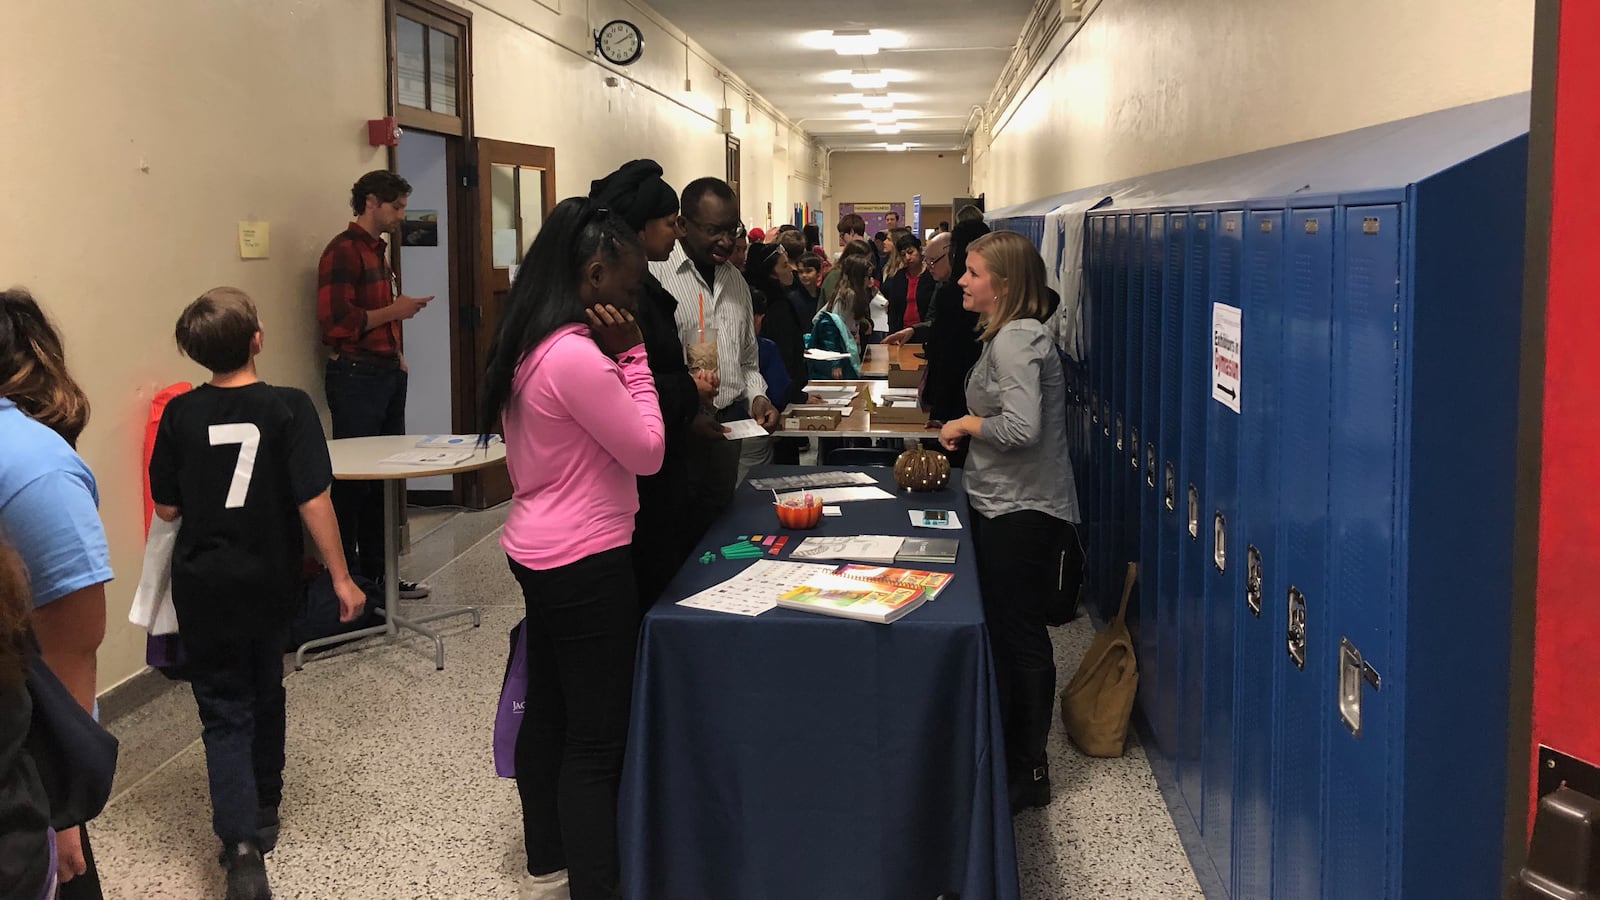 Students speak with school representatives in the hallway of Disney II Magnet High School during a high school admissions fair.